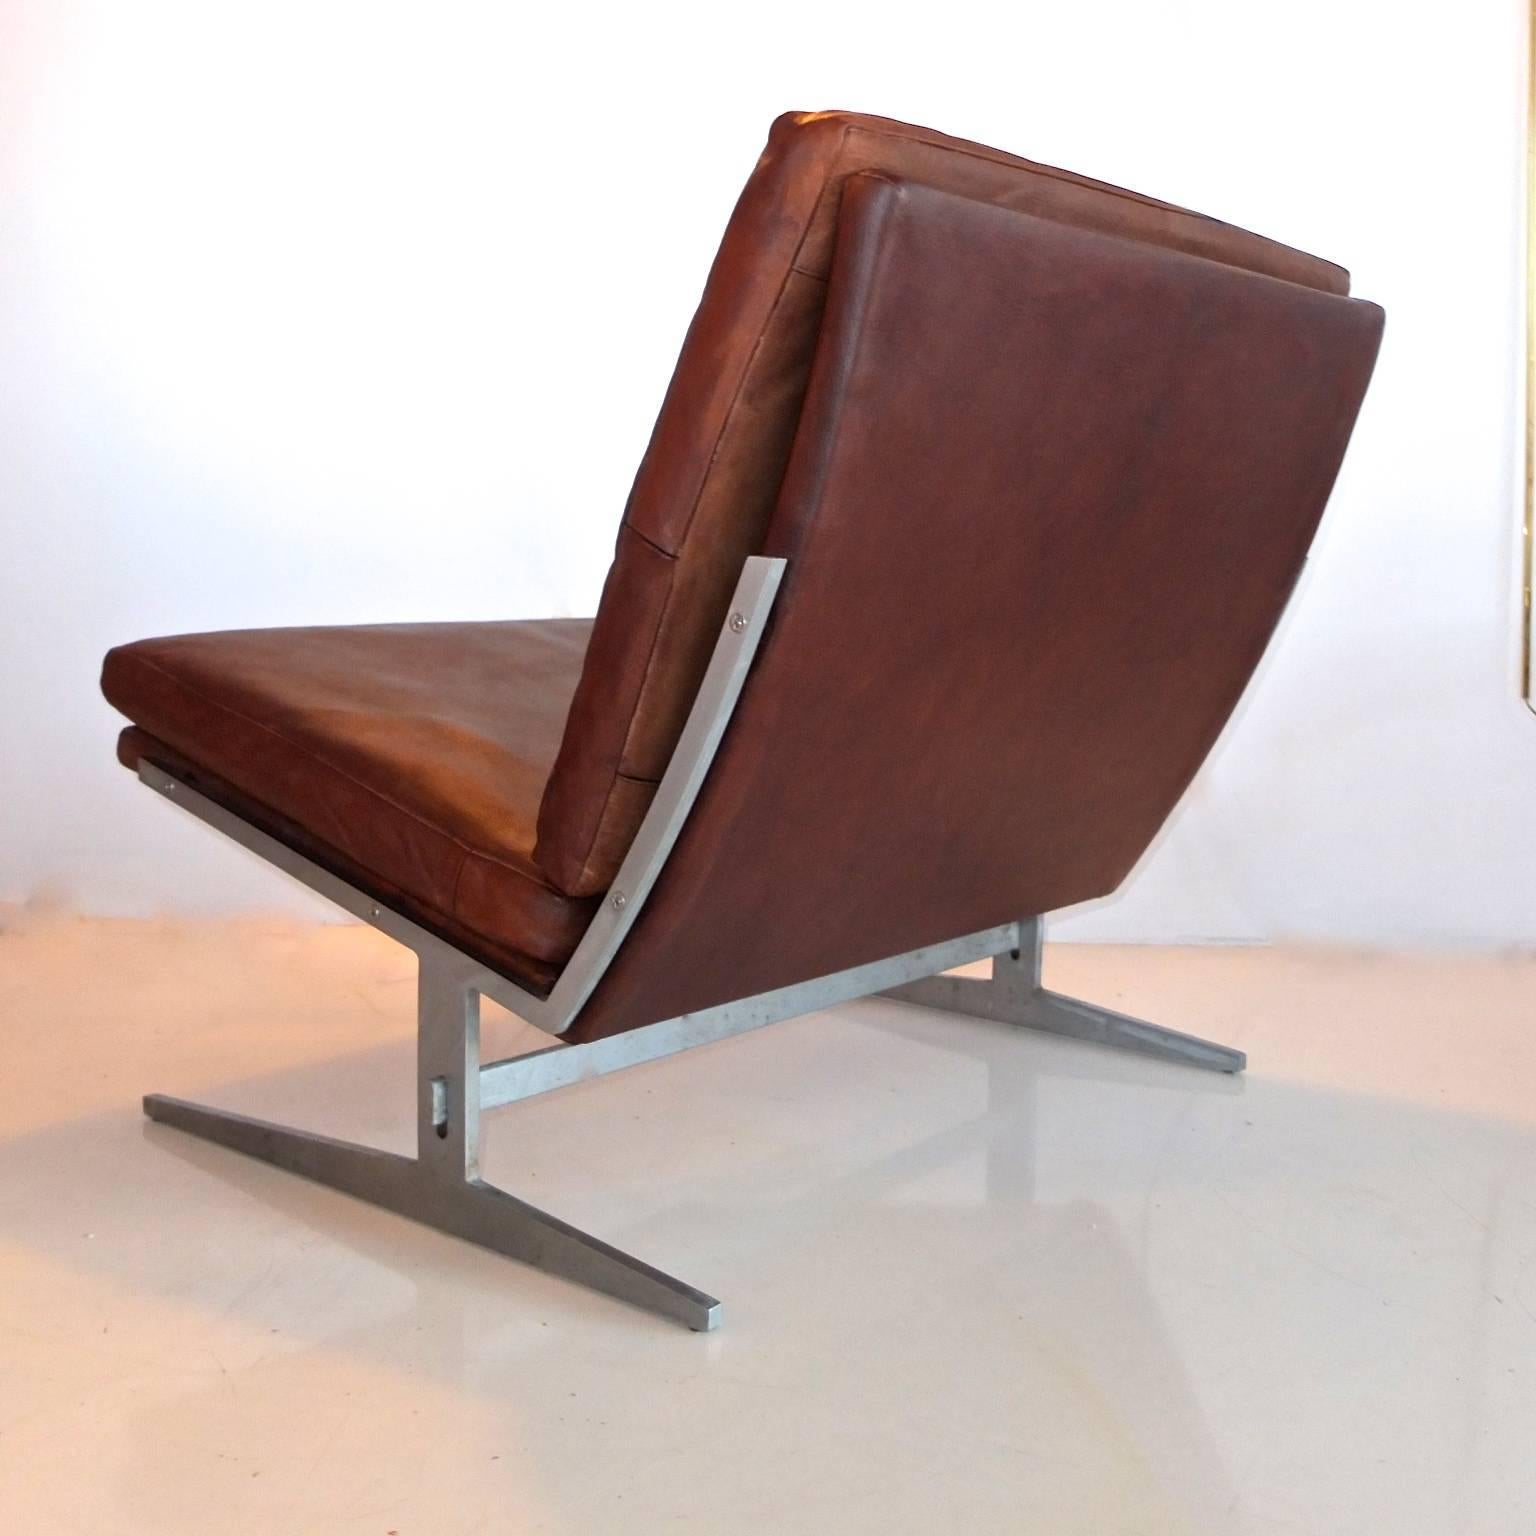 Mid-Century Modern Pair of BO-561 Lounge Chairs Designed by Fabricius & Kastholm